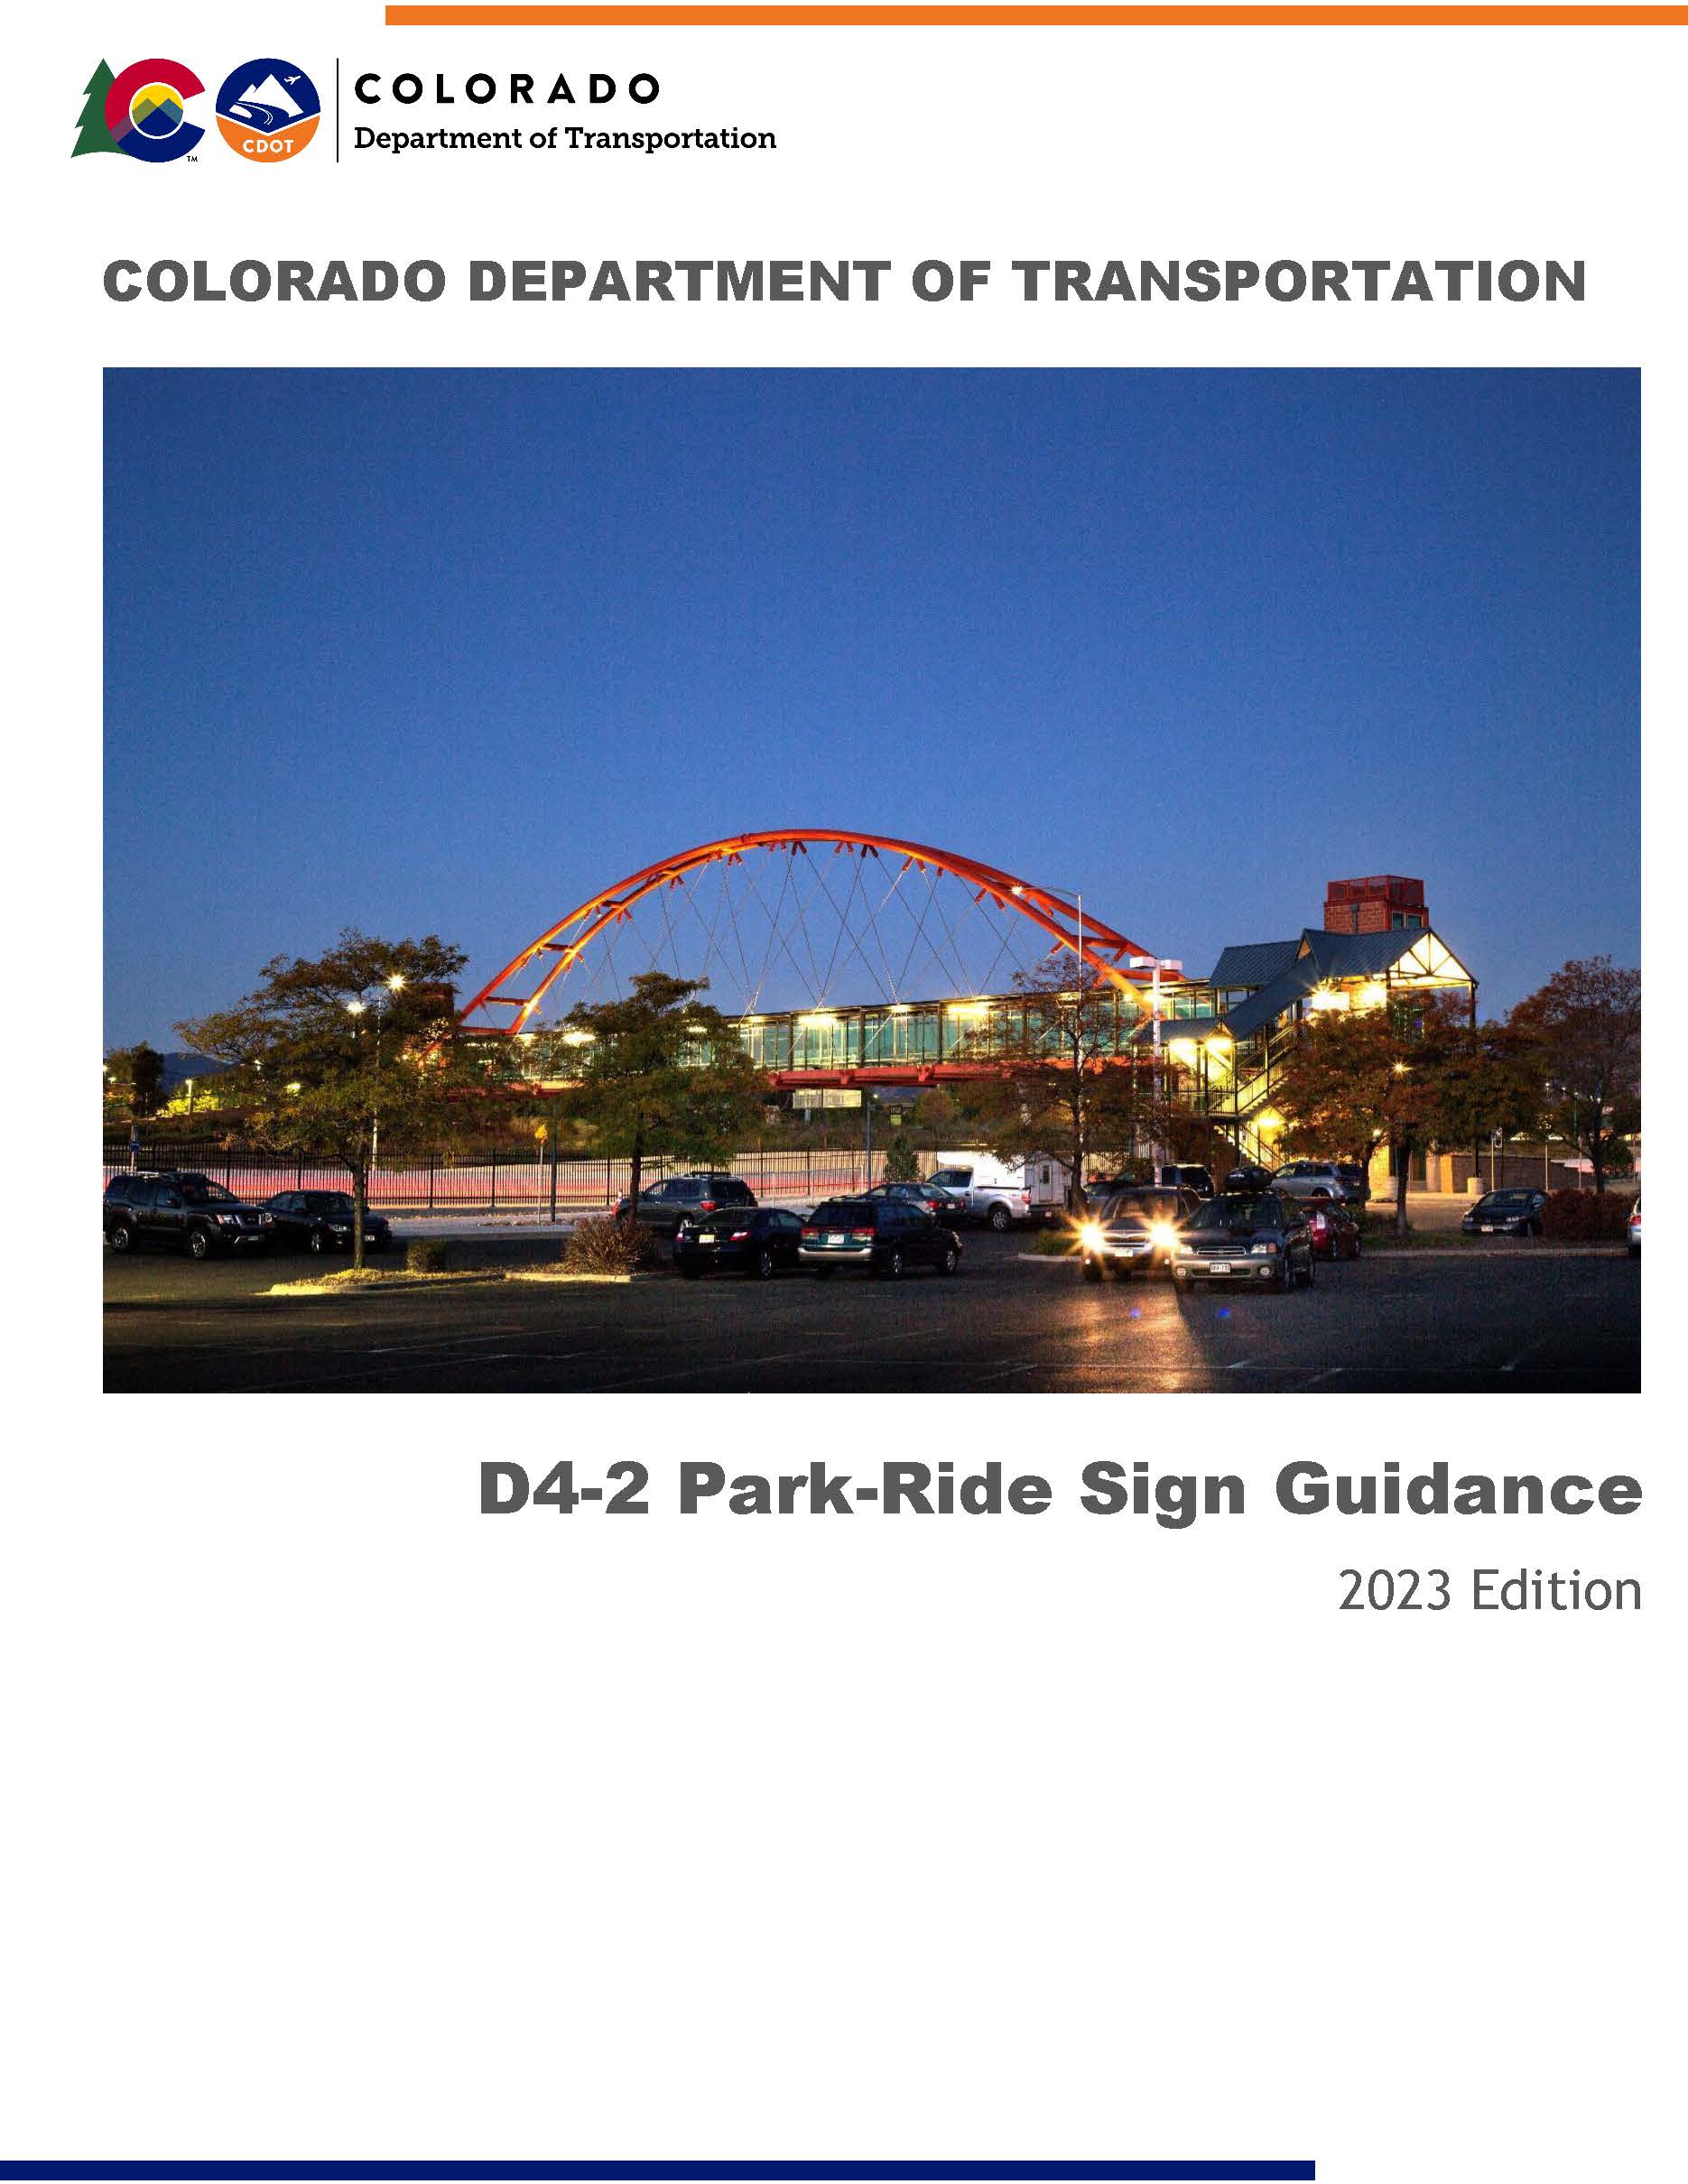 D4-2 Park and Ride Sign Guidance.jpg detail image